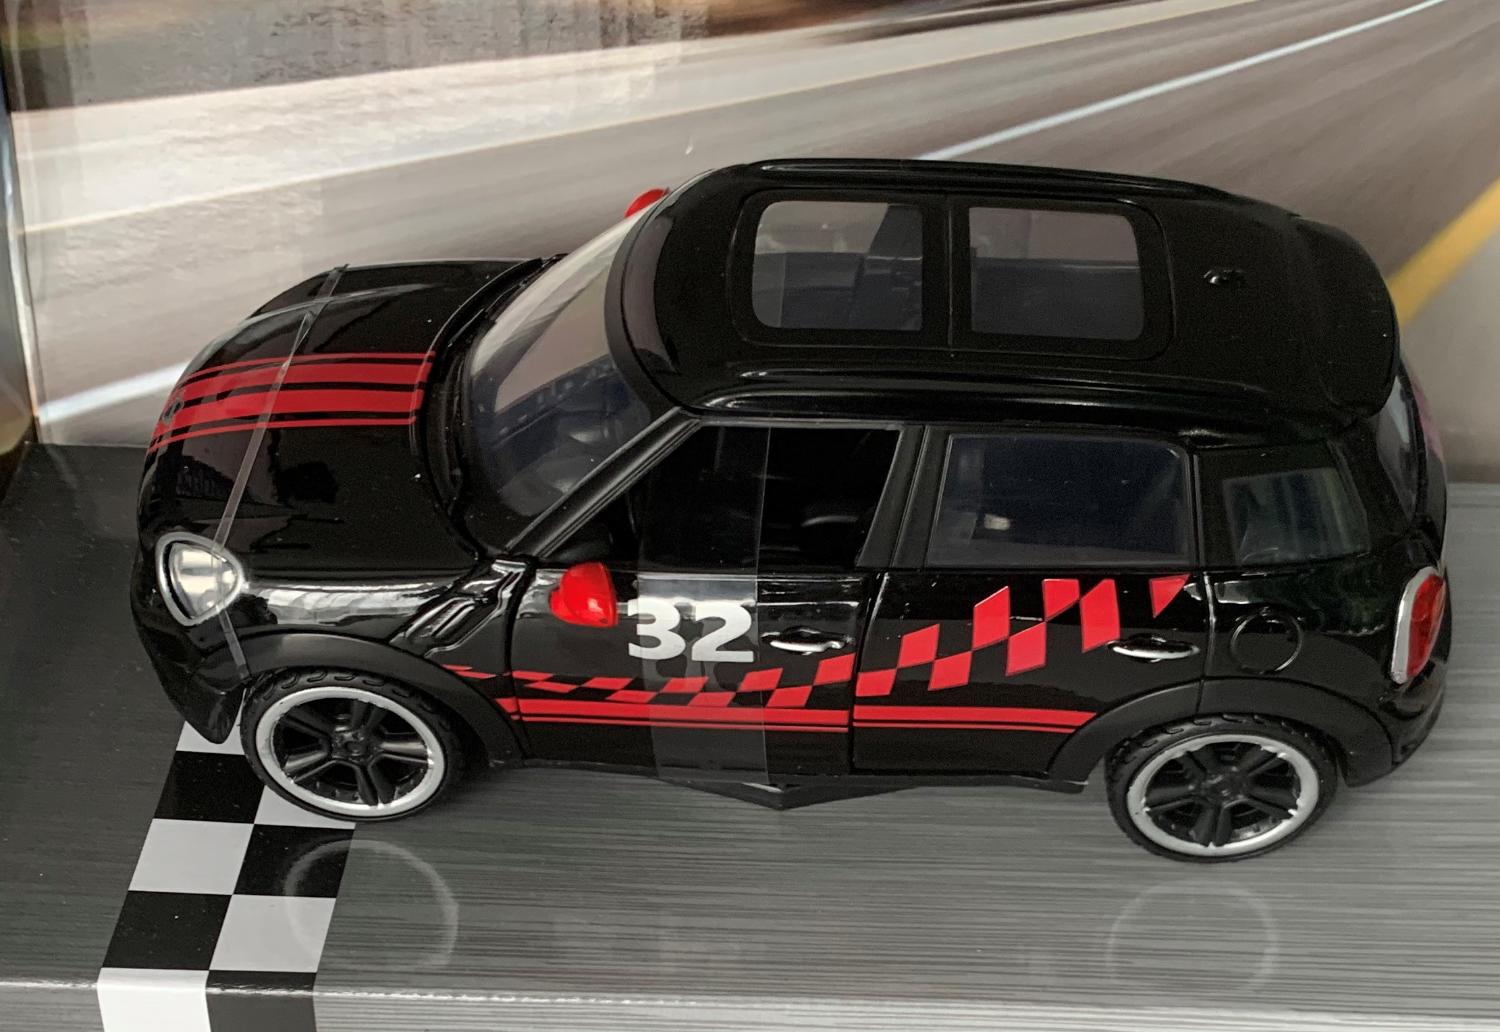 Mini Cooper S Countryman in black 1:24 scale model from Motormax  GT Racing